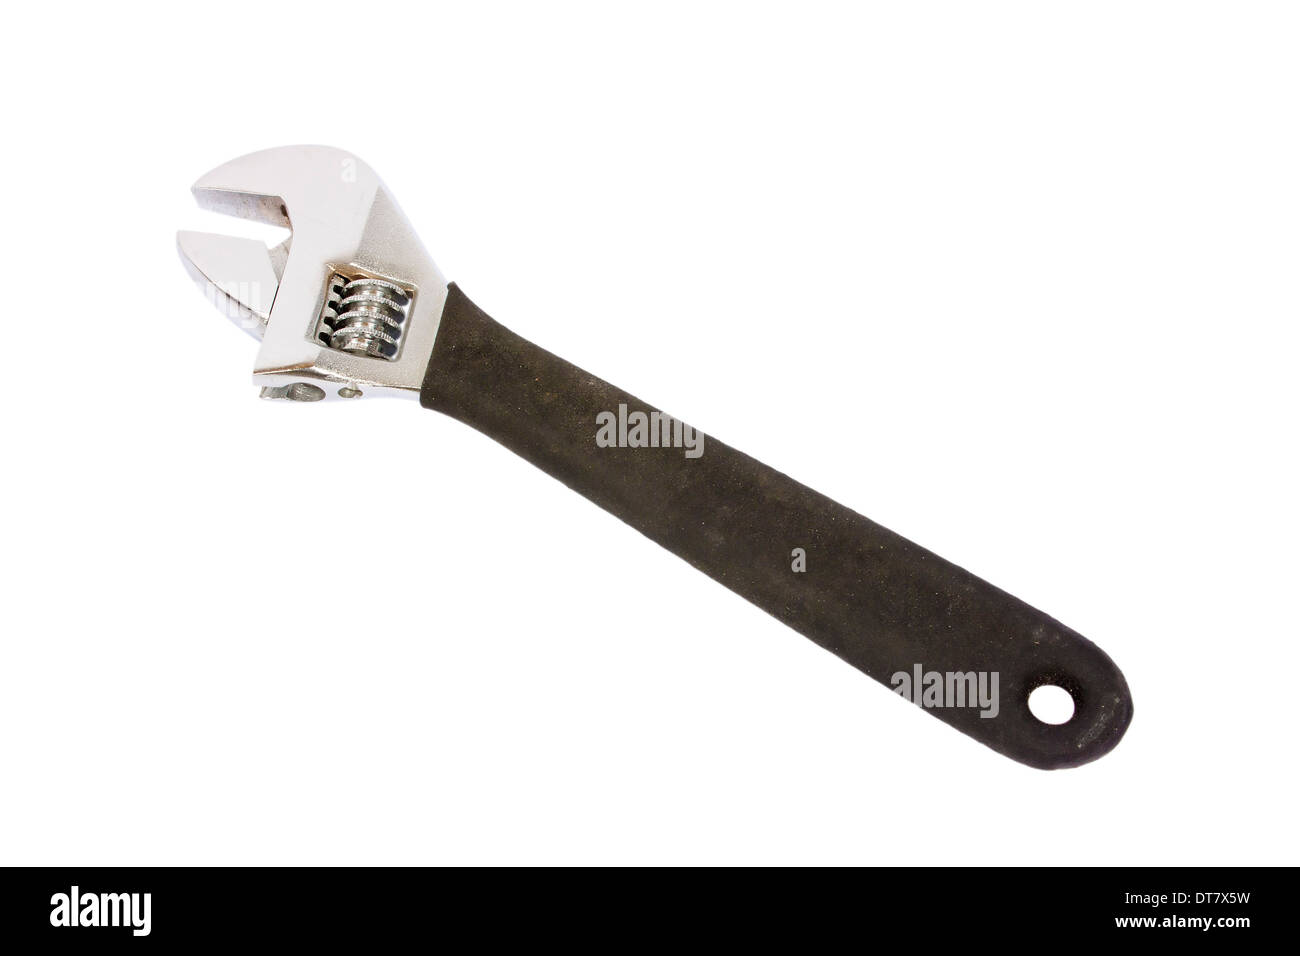 Adjustable crescent wrench on angle isolated on white background Stock Photo